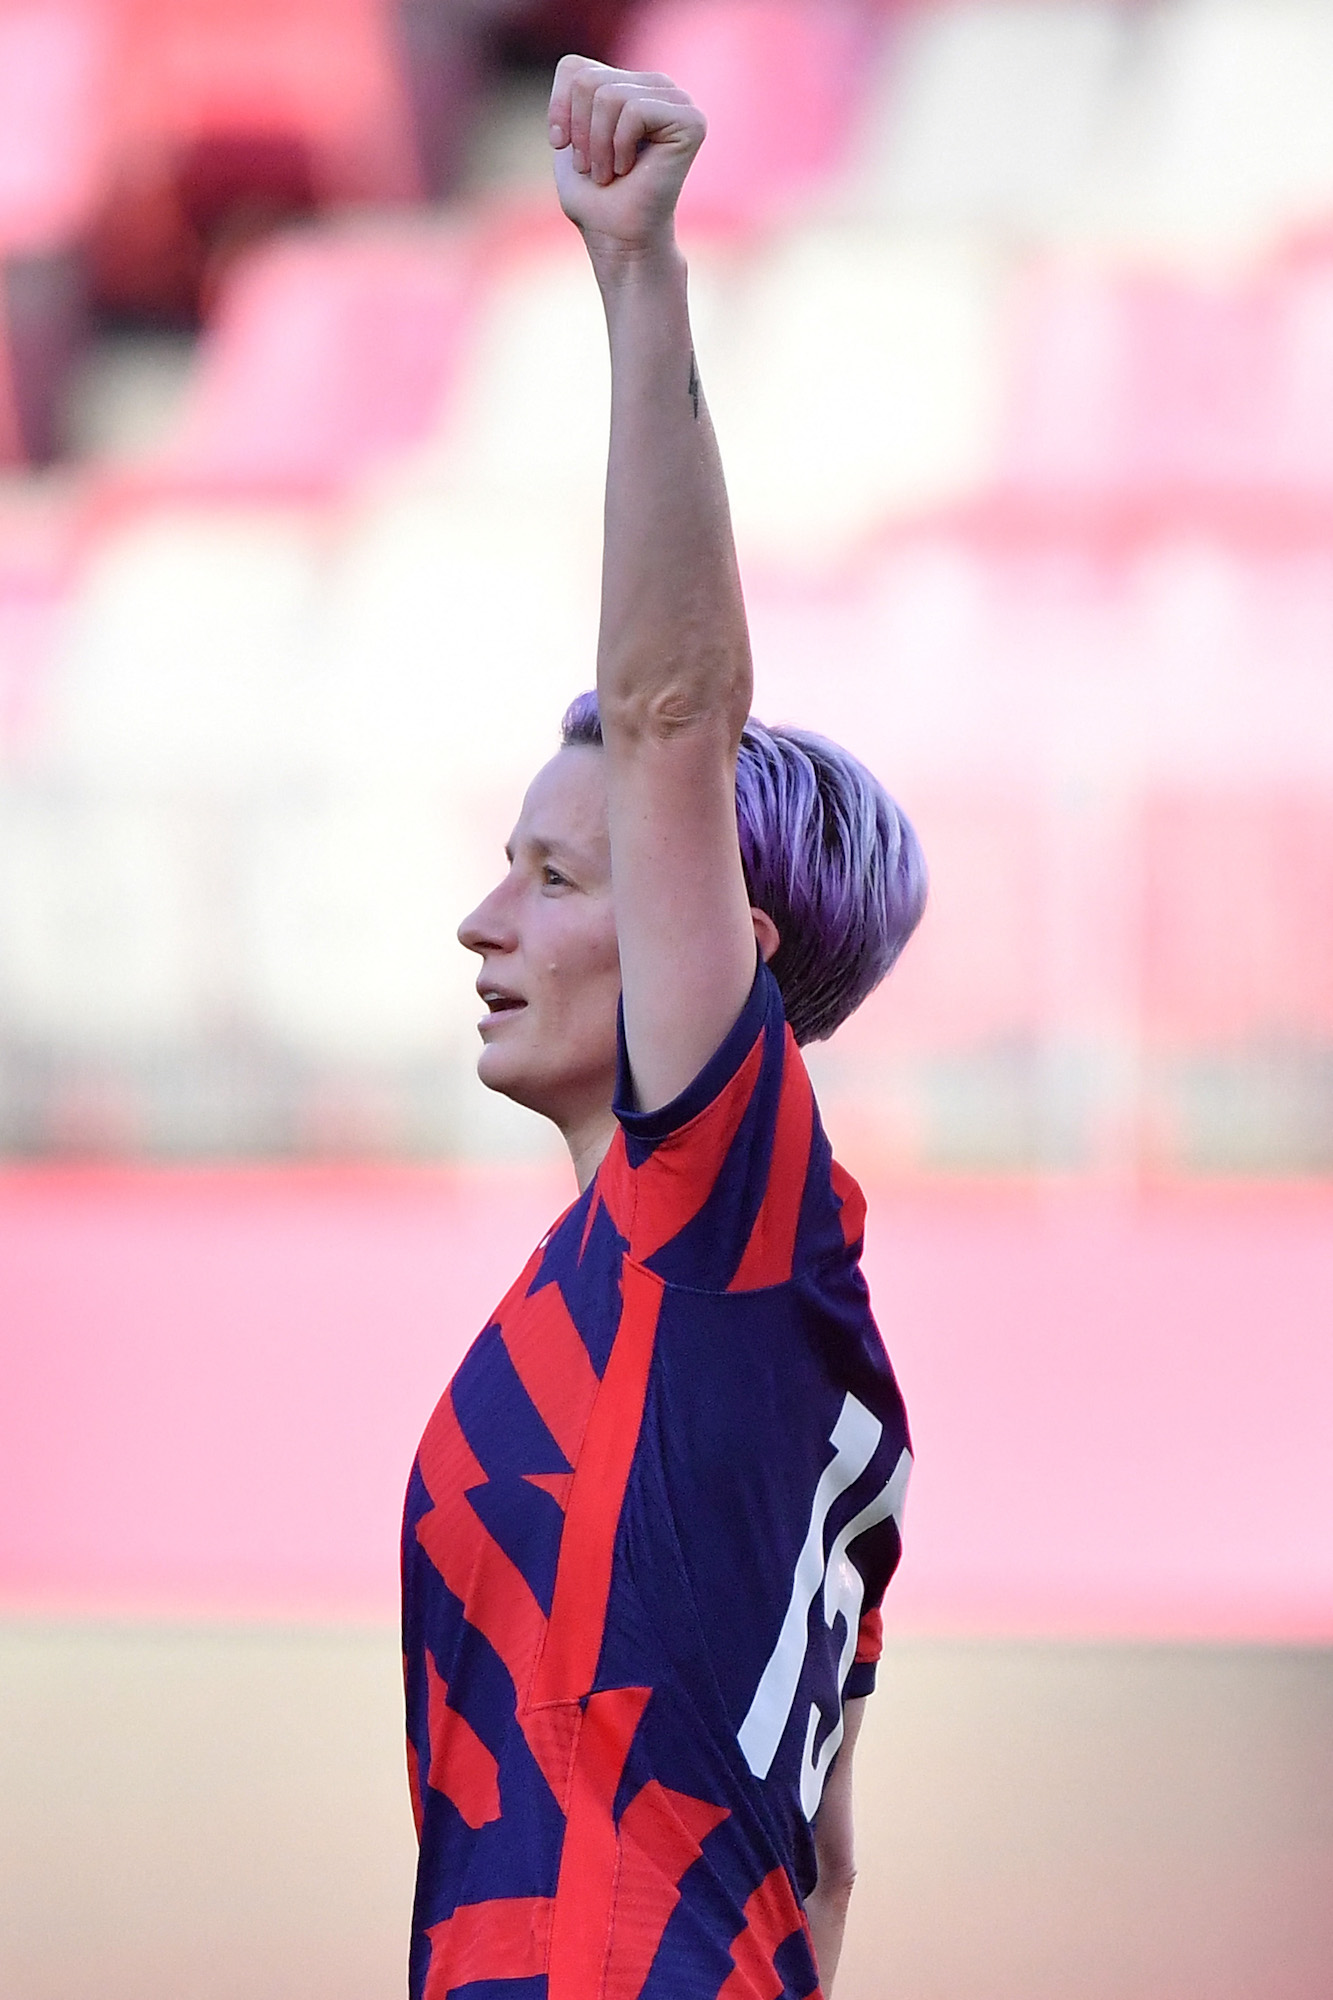 Women's Month USA's forward Megan Rapinoe celebrates scoring during the Tokyo 2020 Olympic Games women's bronze medal football match between Australia and the United States